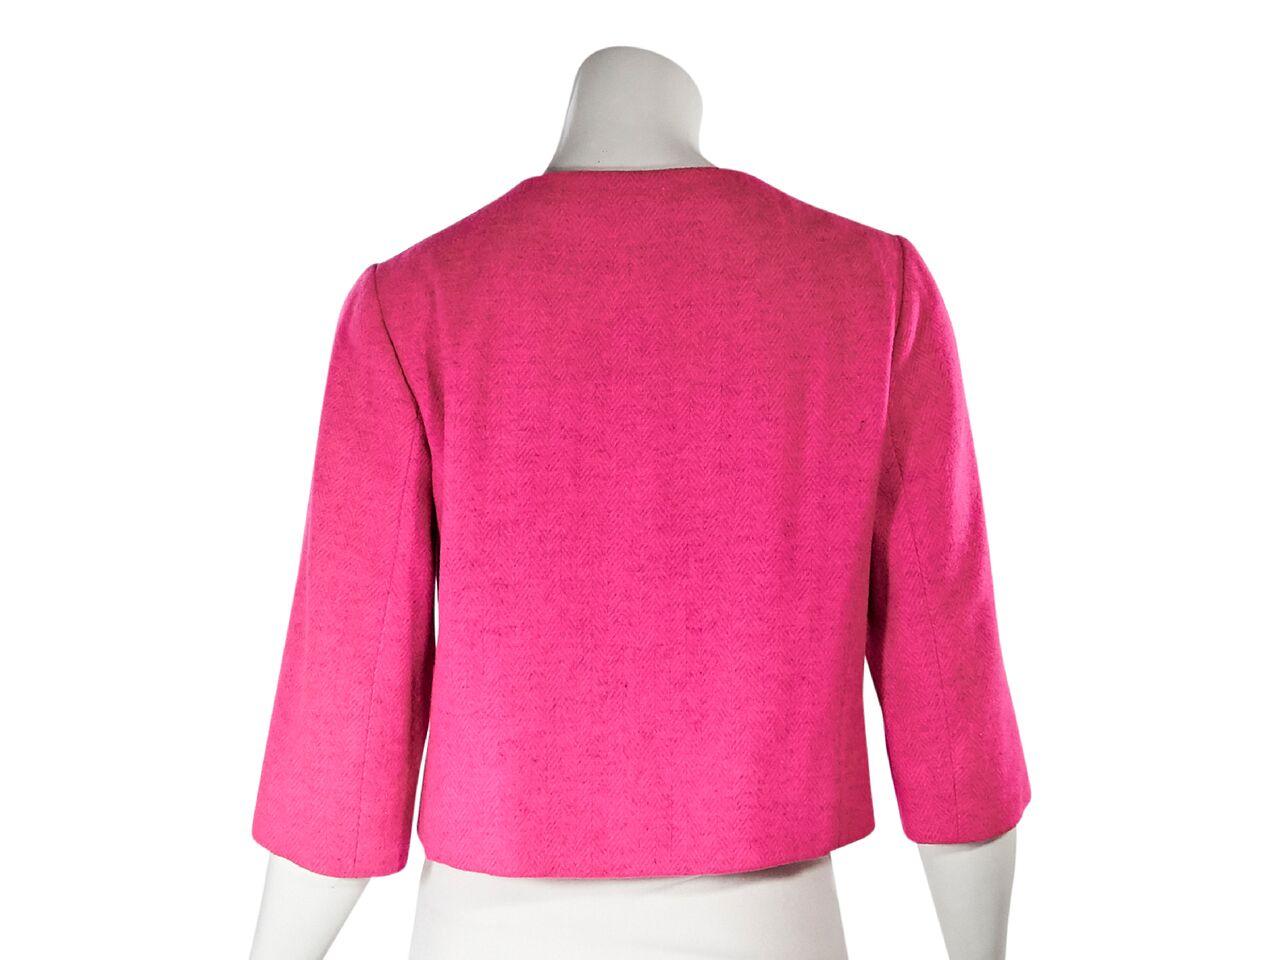 Product details:  Vintage hot pink cropped jacket by Balenciaga.  Roundneck.  Elbow-length sleeves.  Button-front closure.  Waist flap pockets.  38